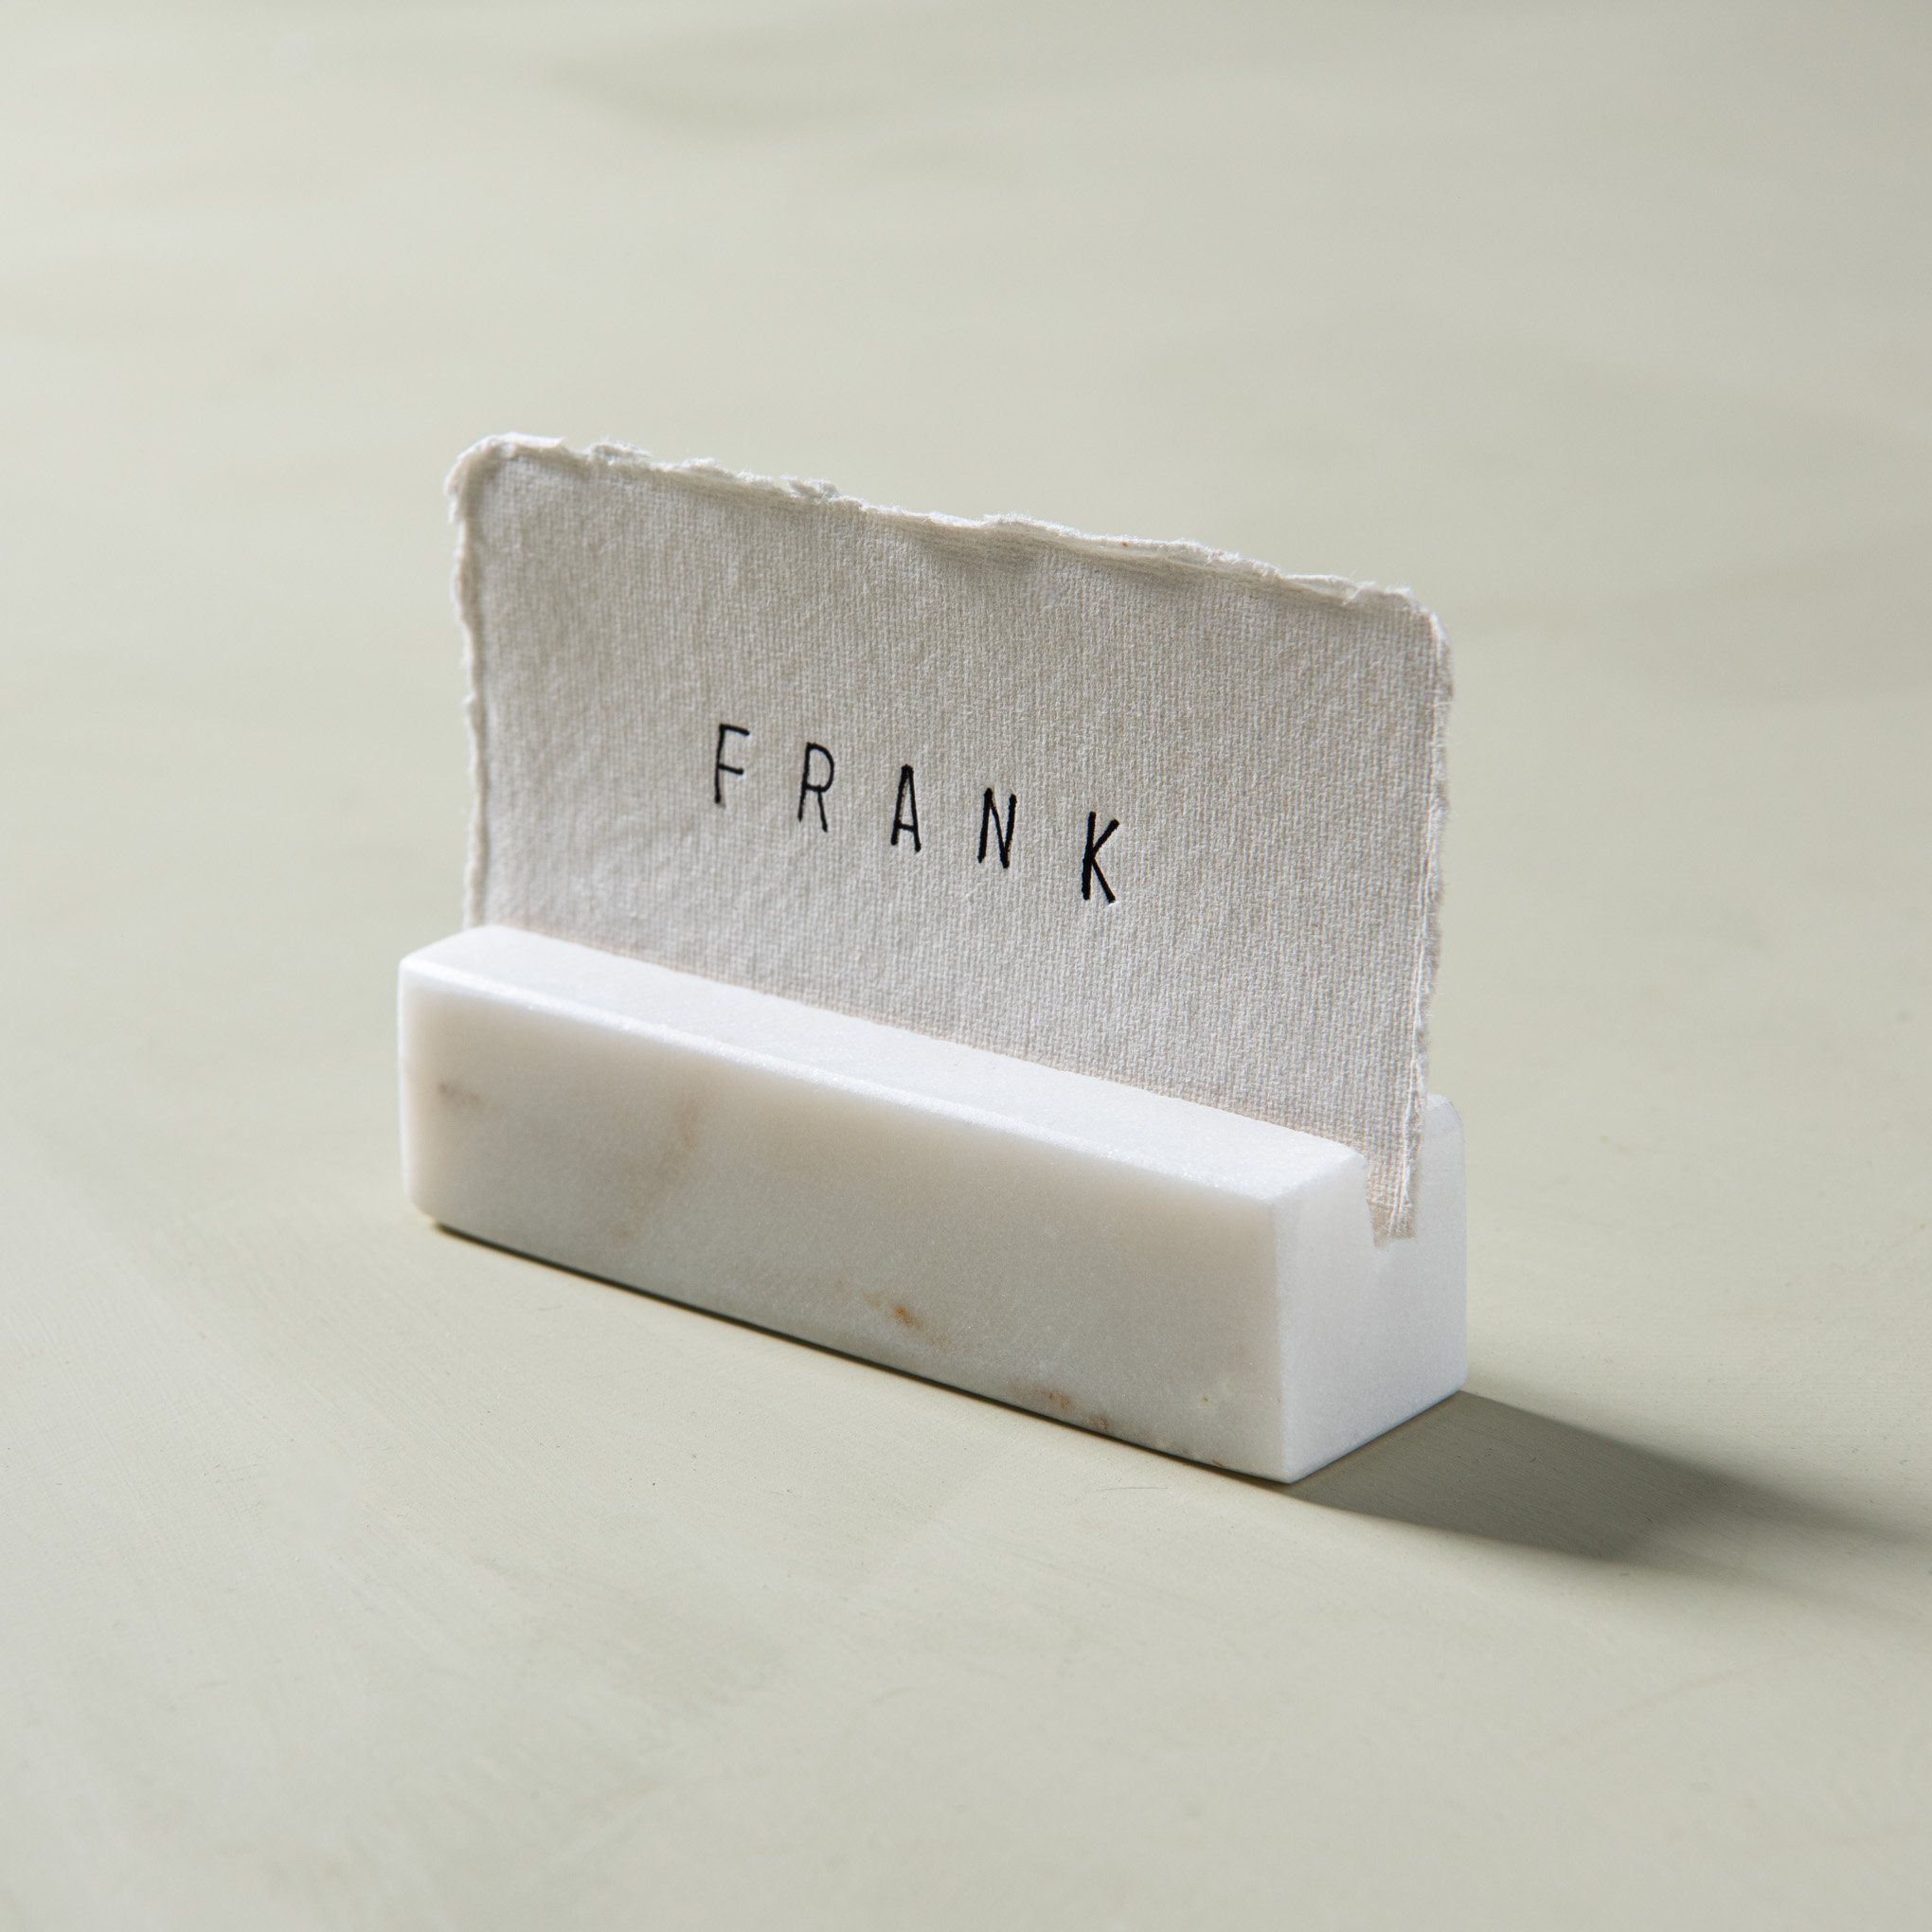 marble placecard holder $4.00